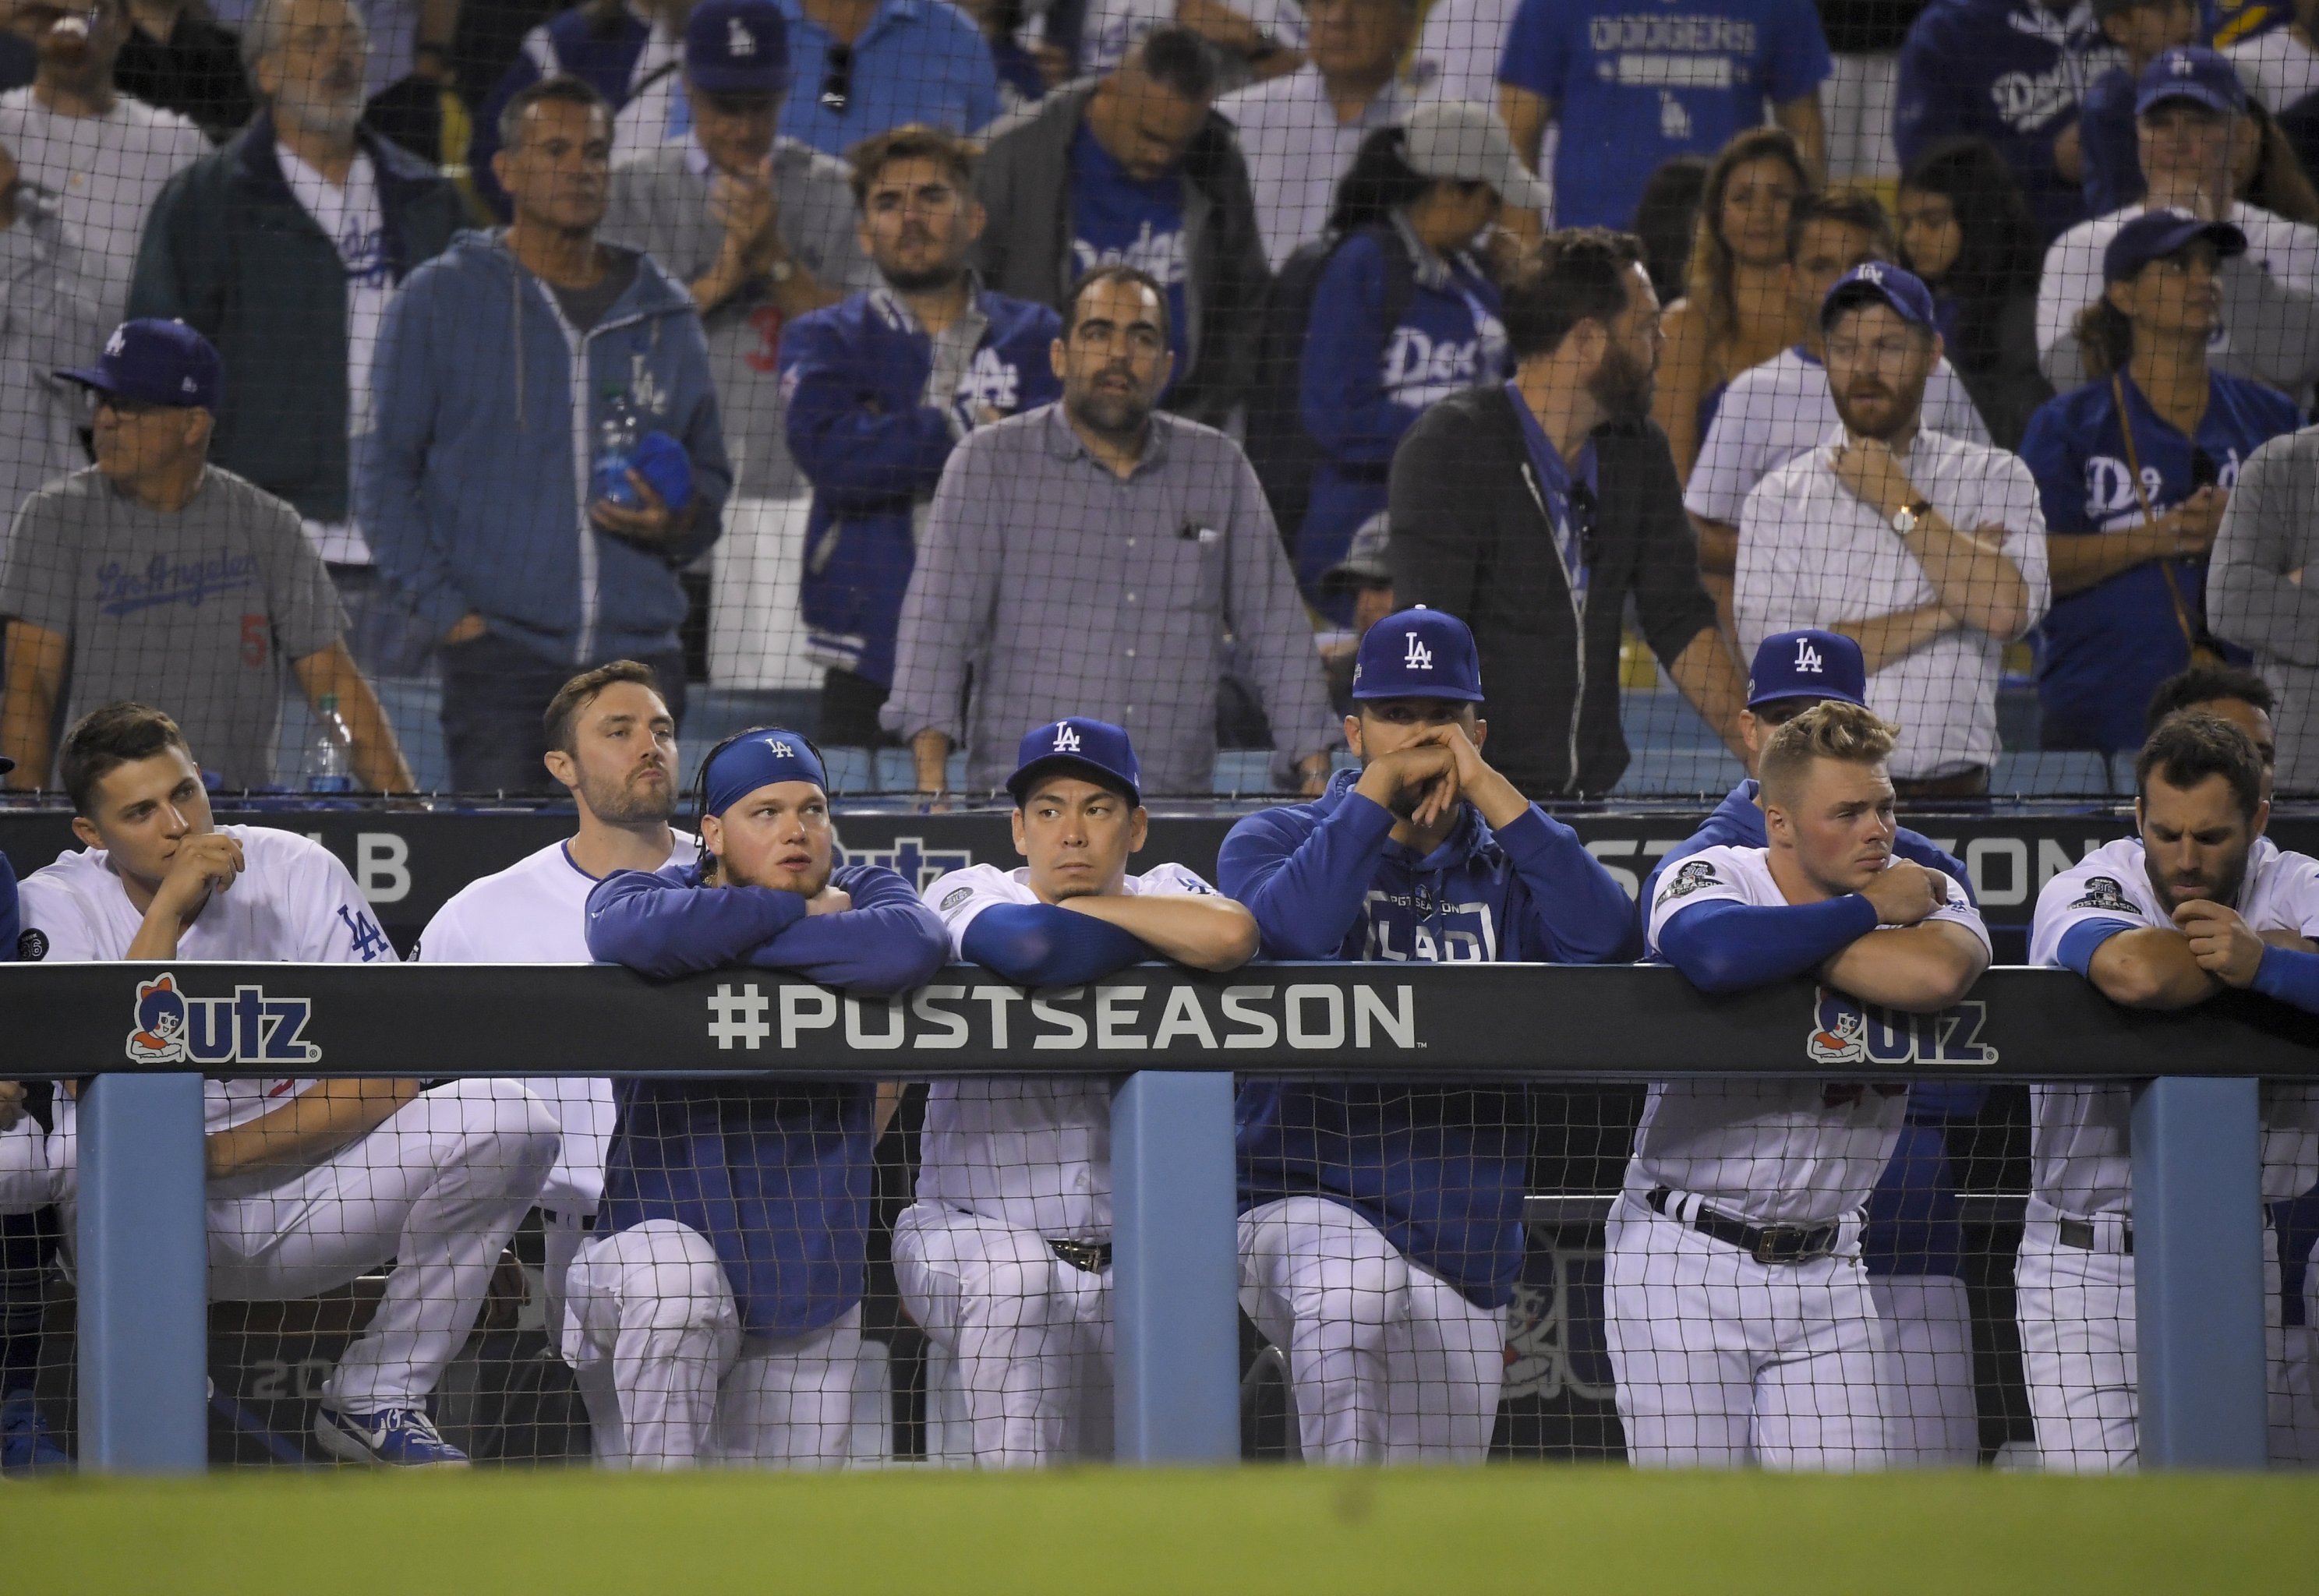 Jansen blows save, Dodgers squander Game 4, Series tied at 2